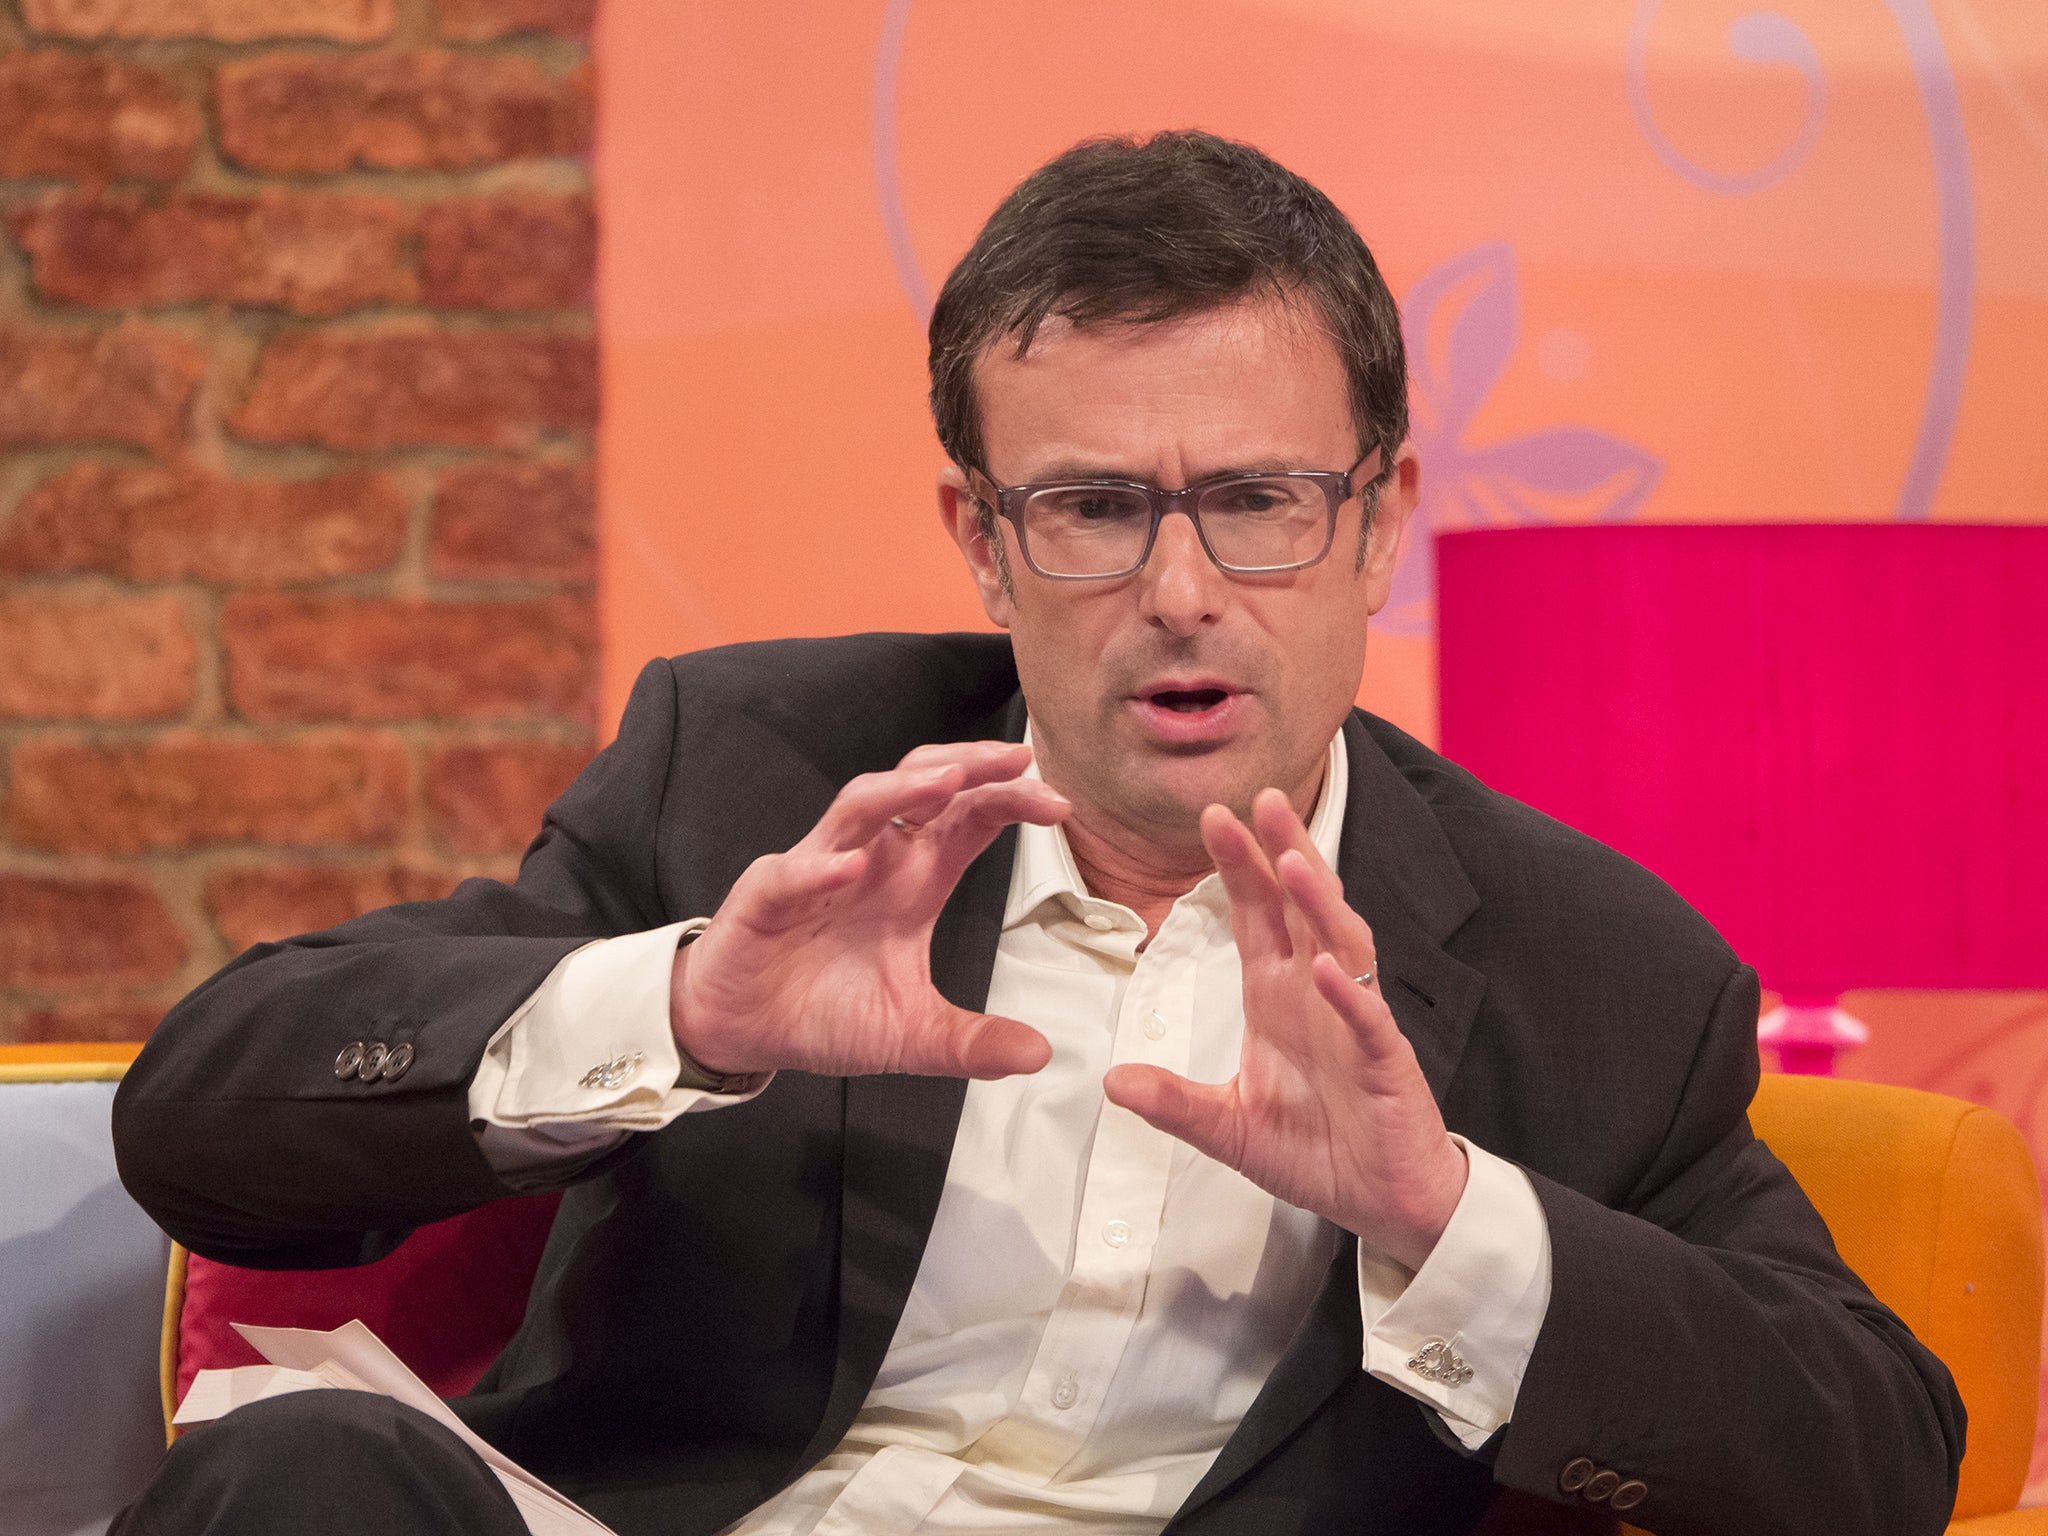 Robert Peston first joined the BBC in 2006 as Business editor